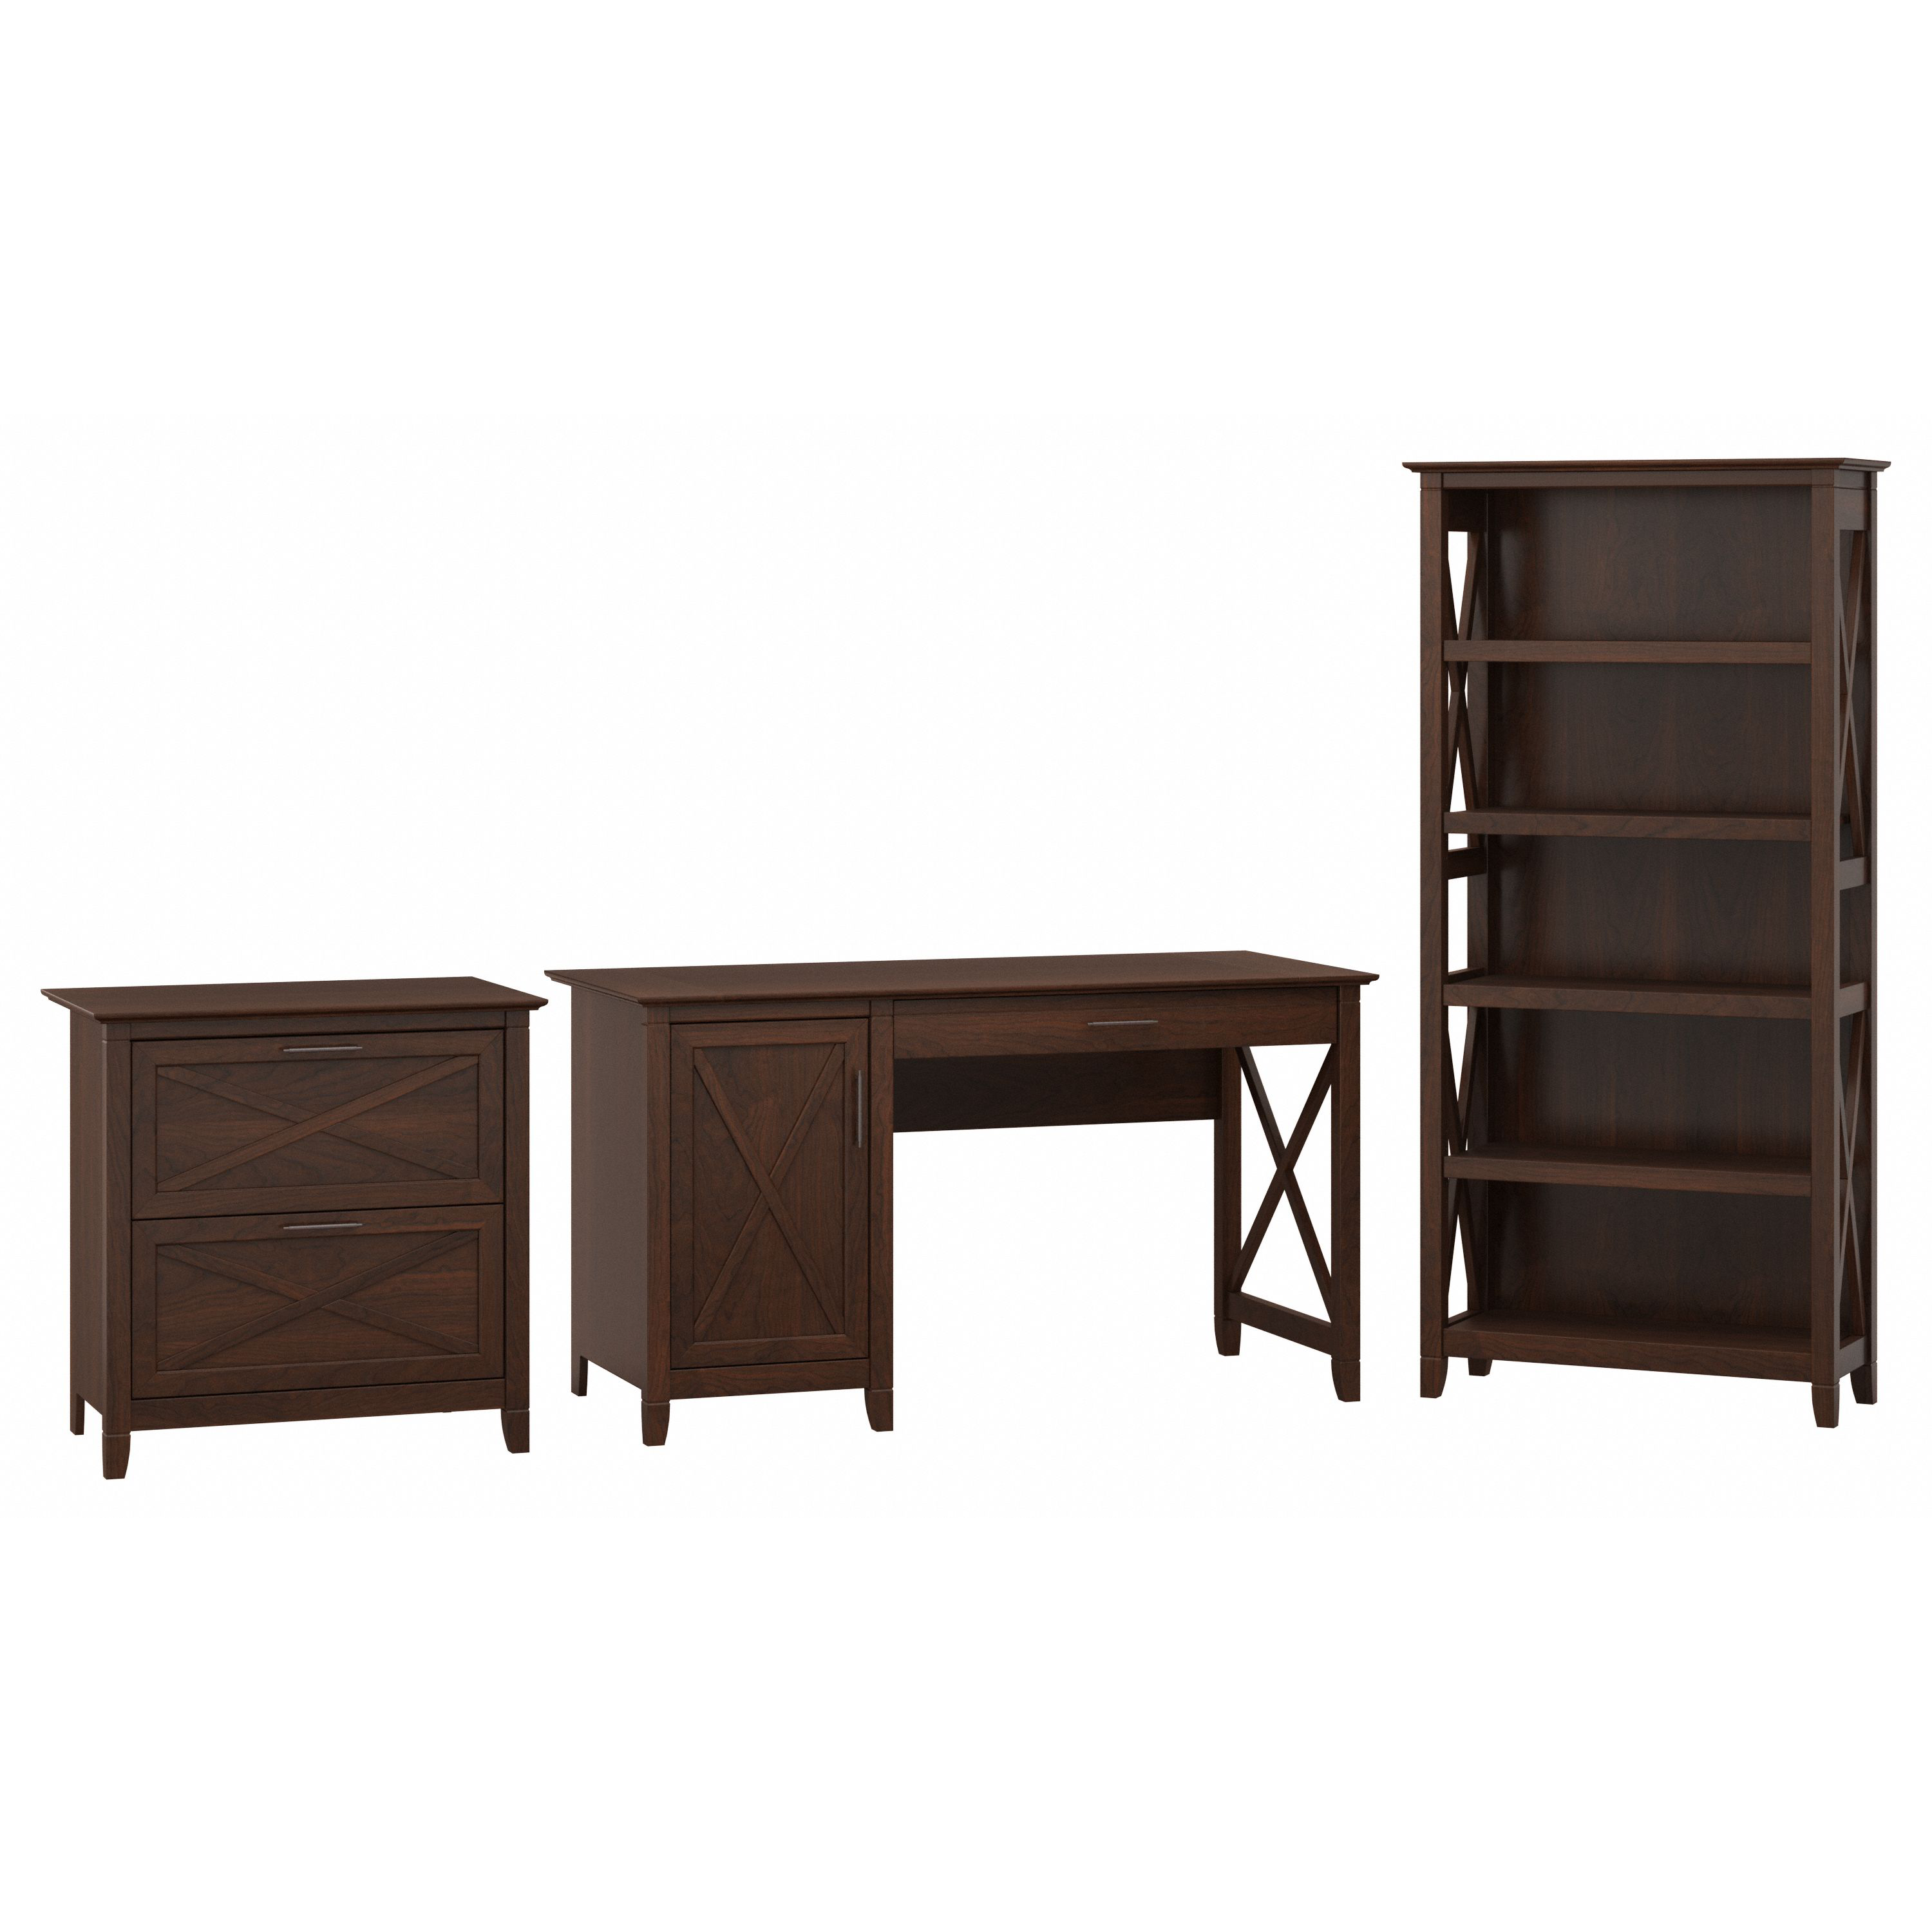 Shop Bush Furniture Key West 54W Computer Desk with 2 Drawer Lateral File Cabinet and 5 Shelf Bookcase 02 KWS009BC #color_bing cherry